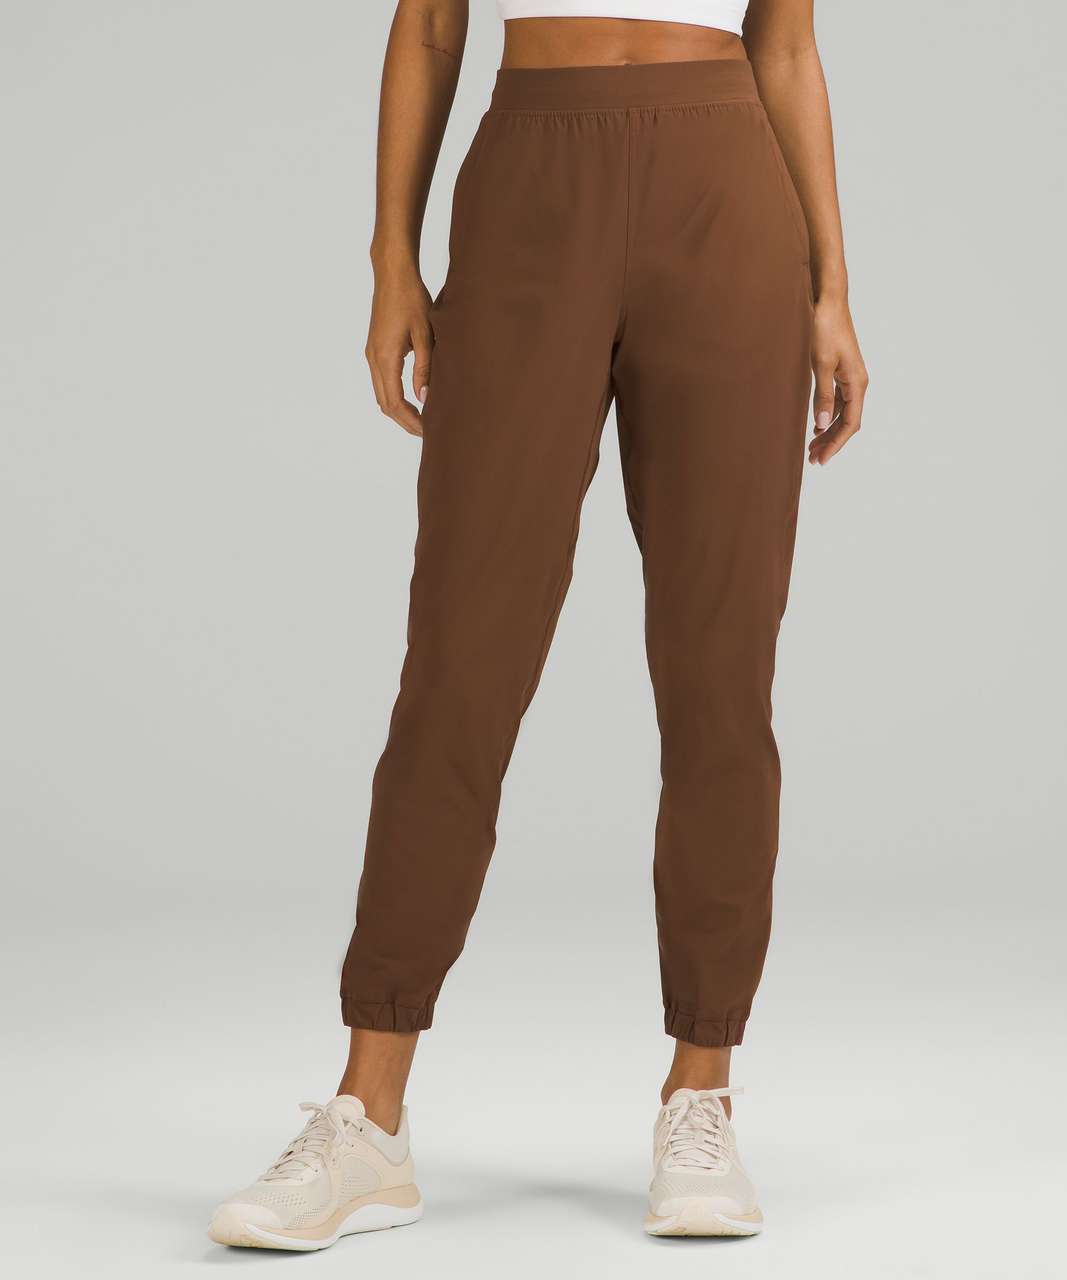 Lululemon Adapted State High-Rise Jogger *Full Length - Roasted Brown